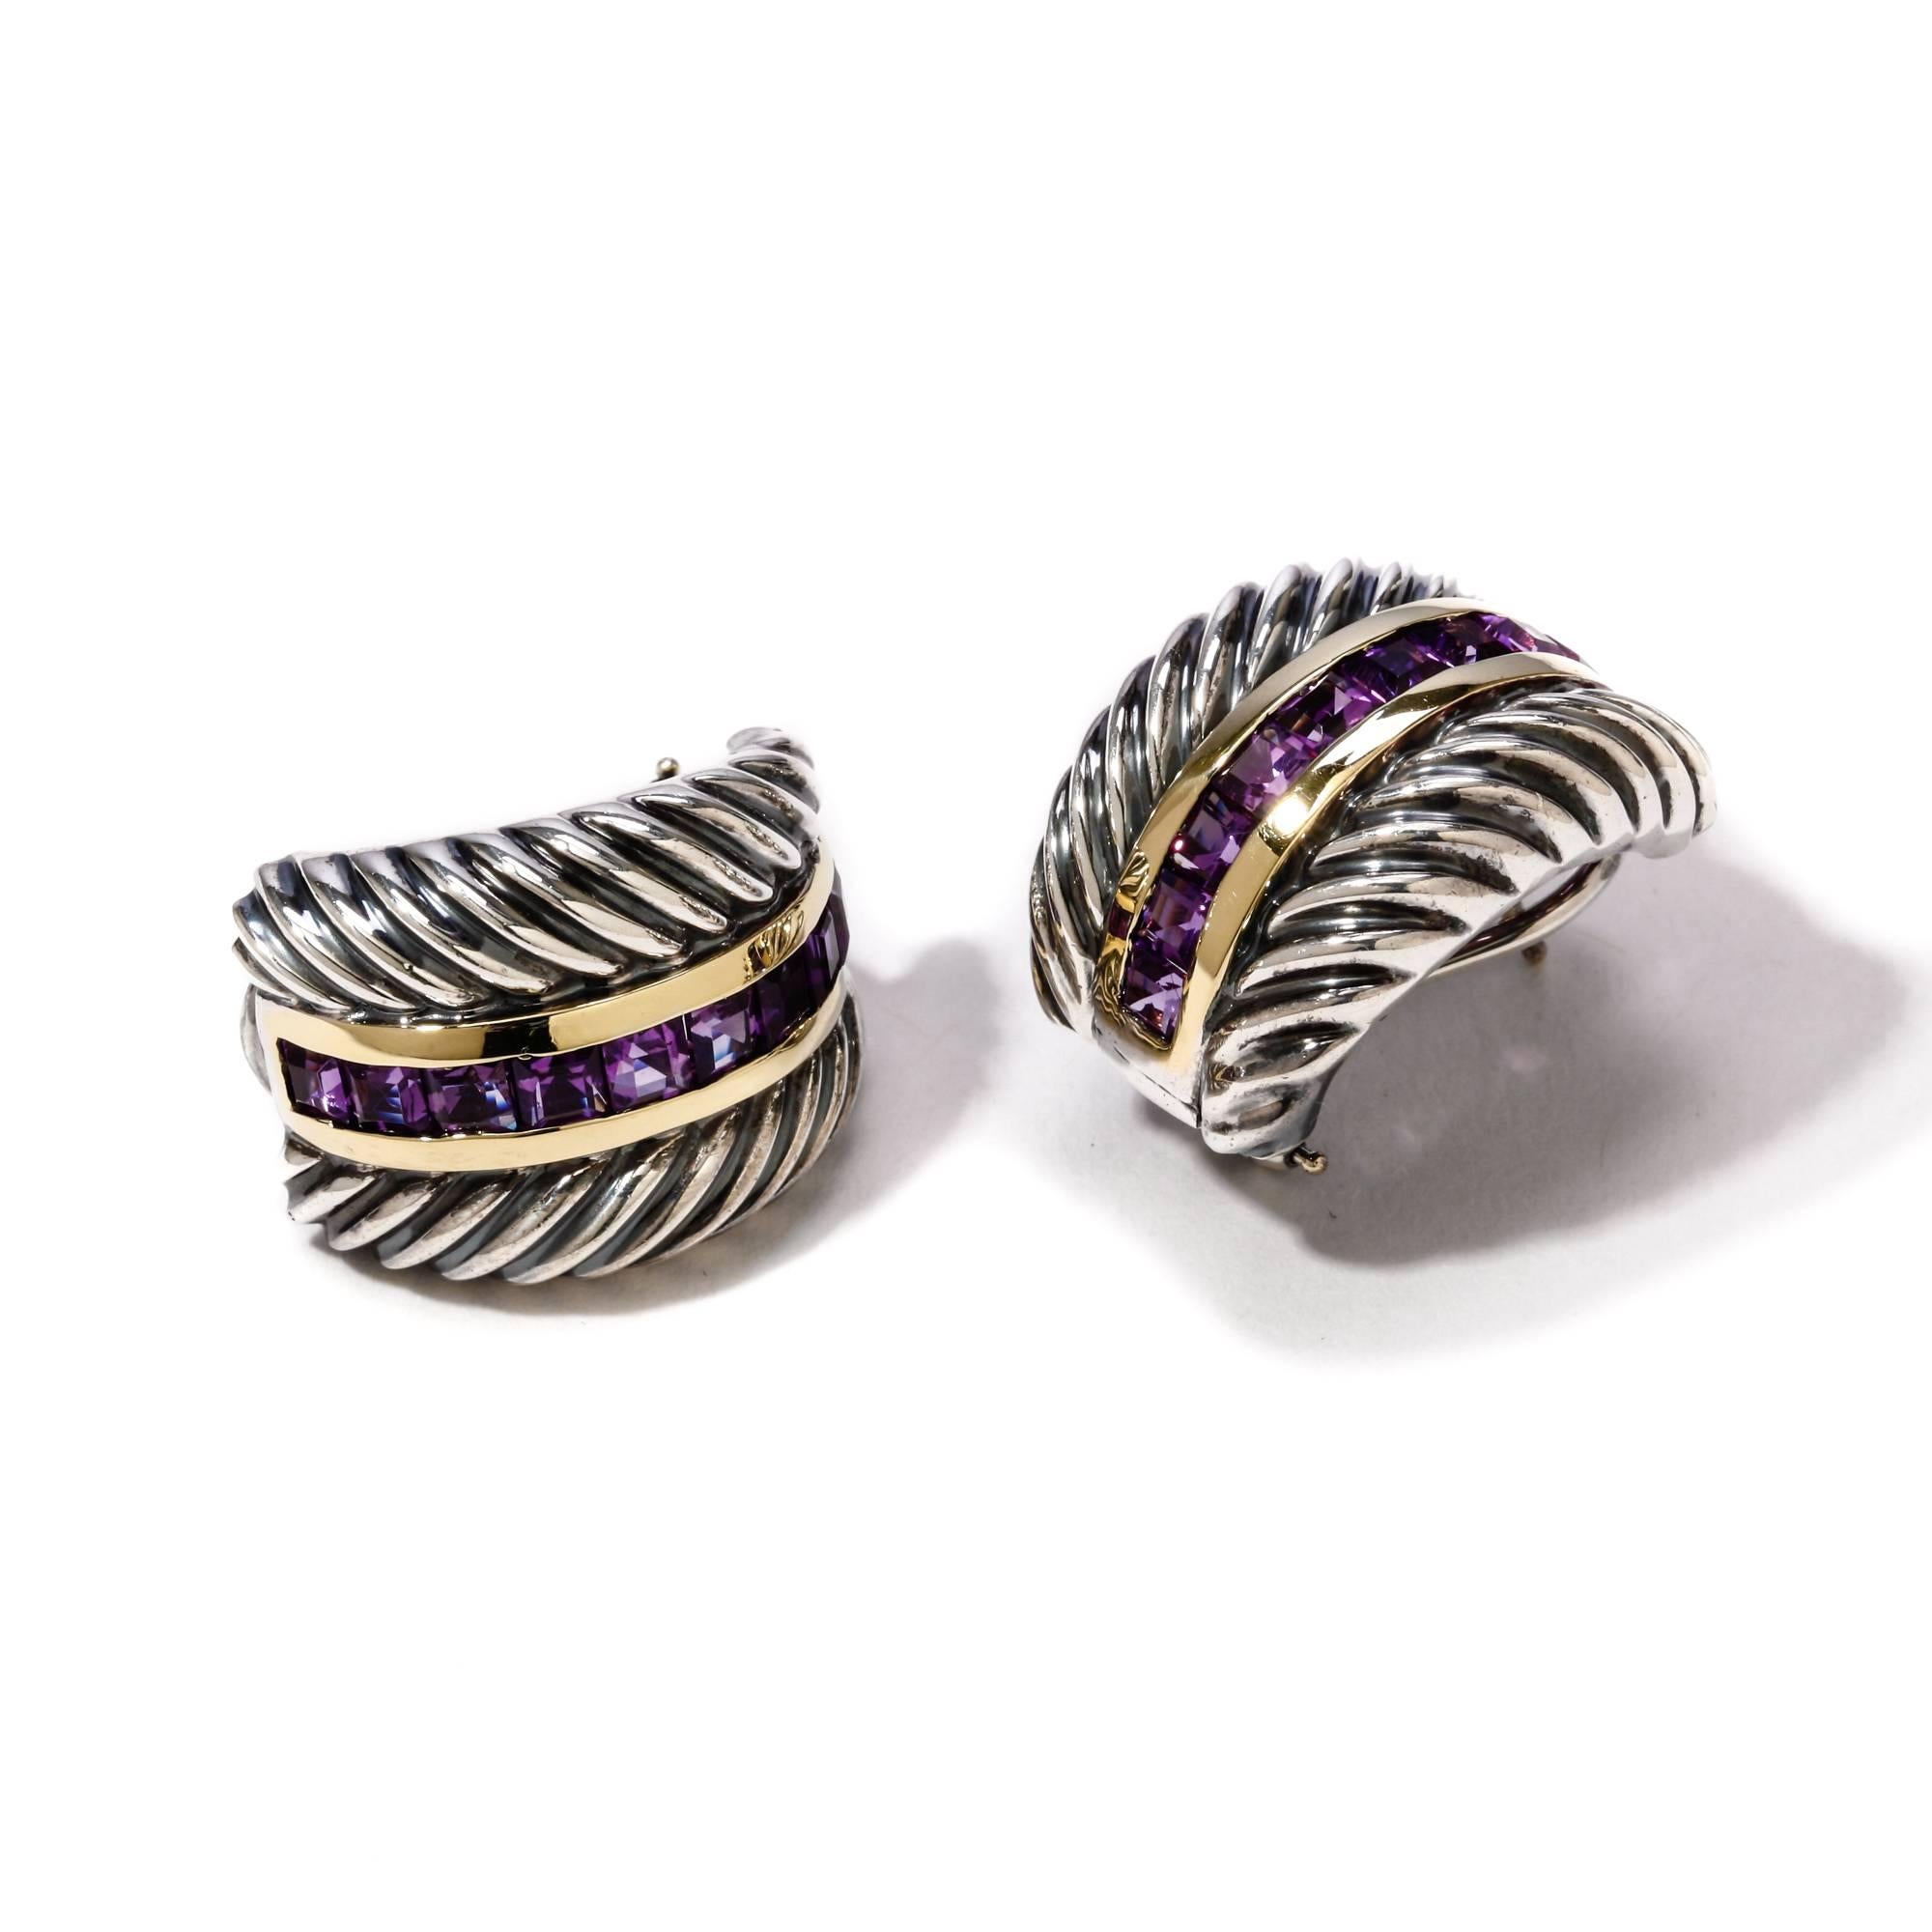 These David Yurman amethyst, sterling silver and 14 karat yellow gold cable earrings are in good condition. The yellow gold is slightly worn at the top and bottom of the earrings, but this is not noticeable when the earrings are worn. Each earring